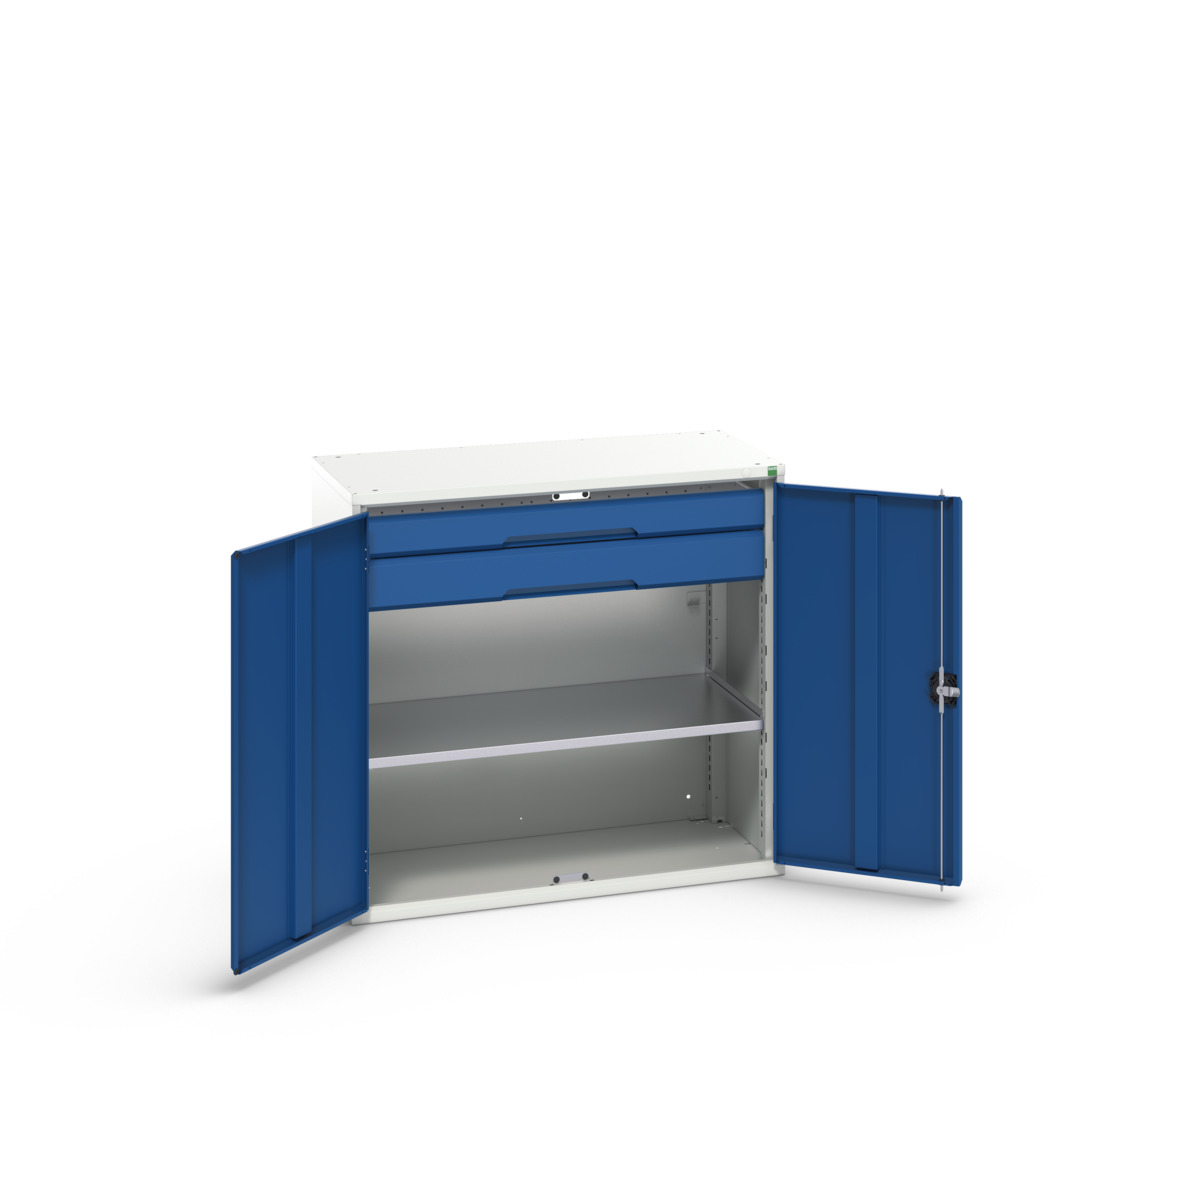 16926553.11 - verso kitted cupboard